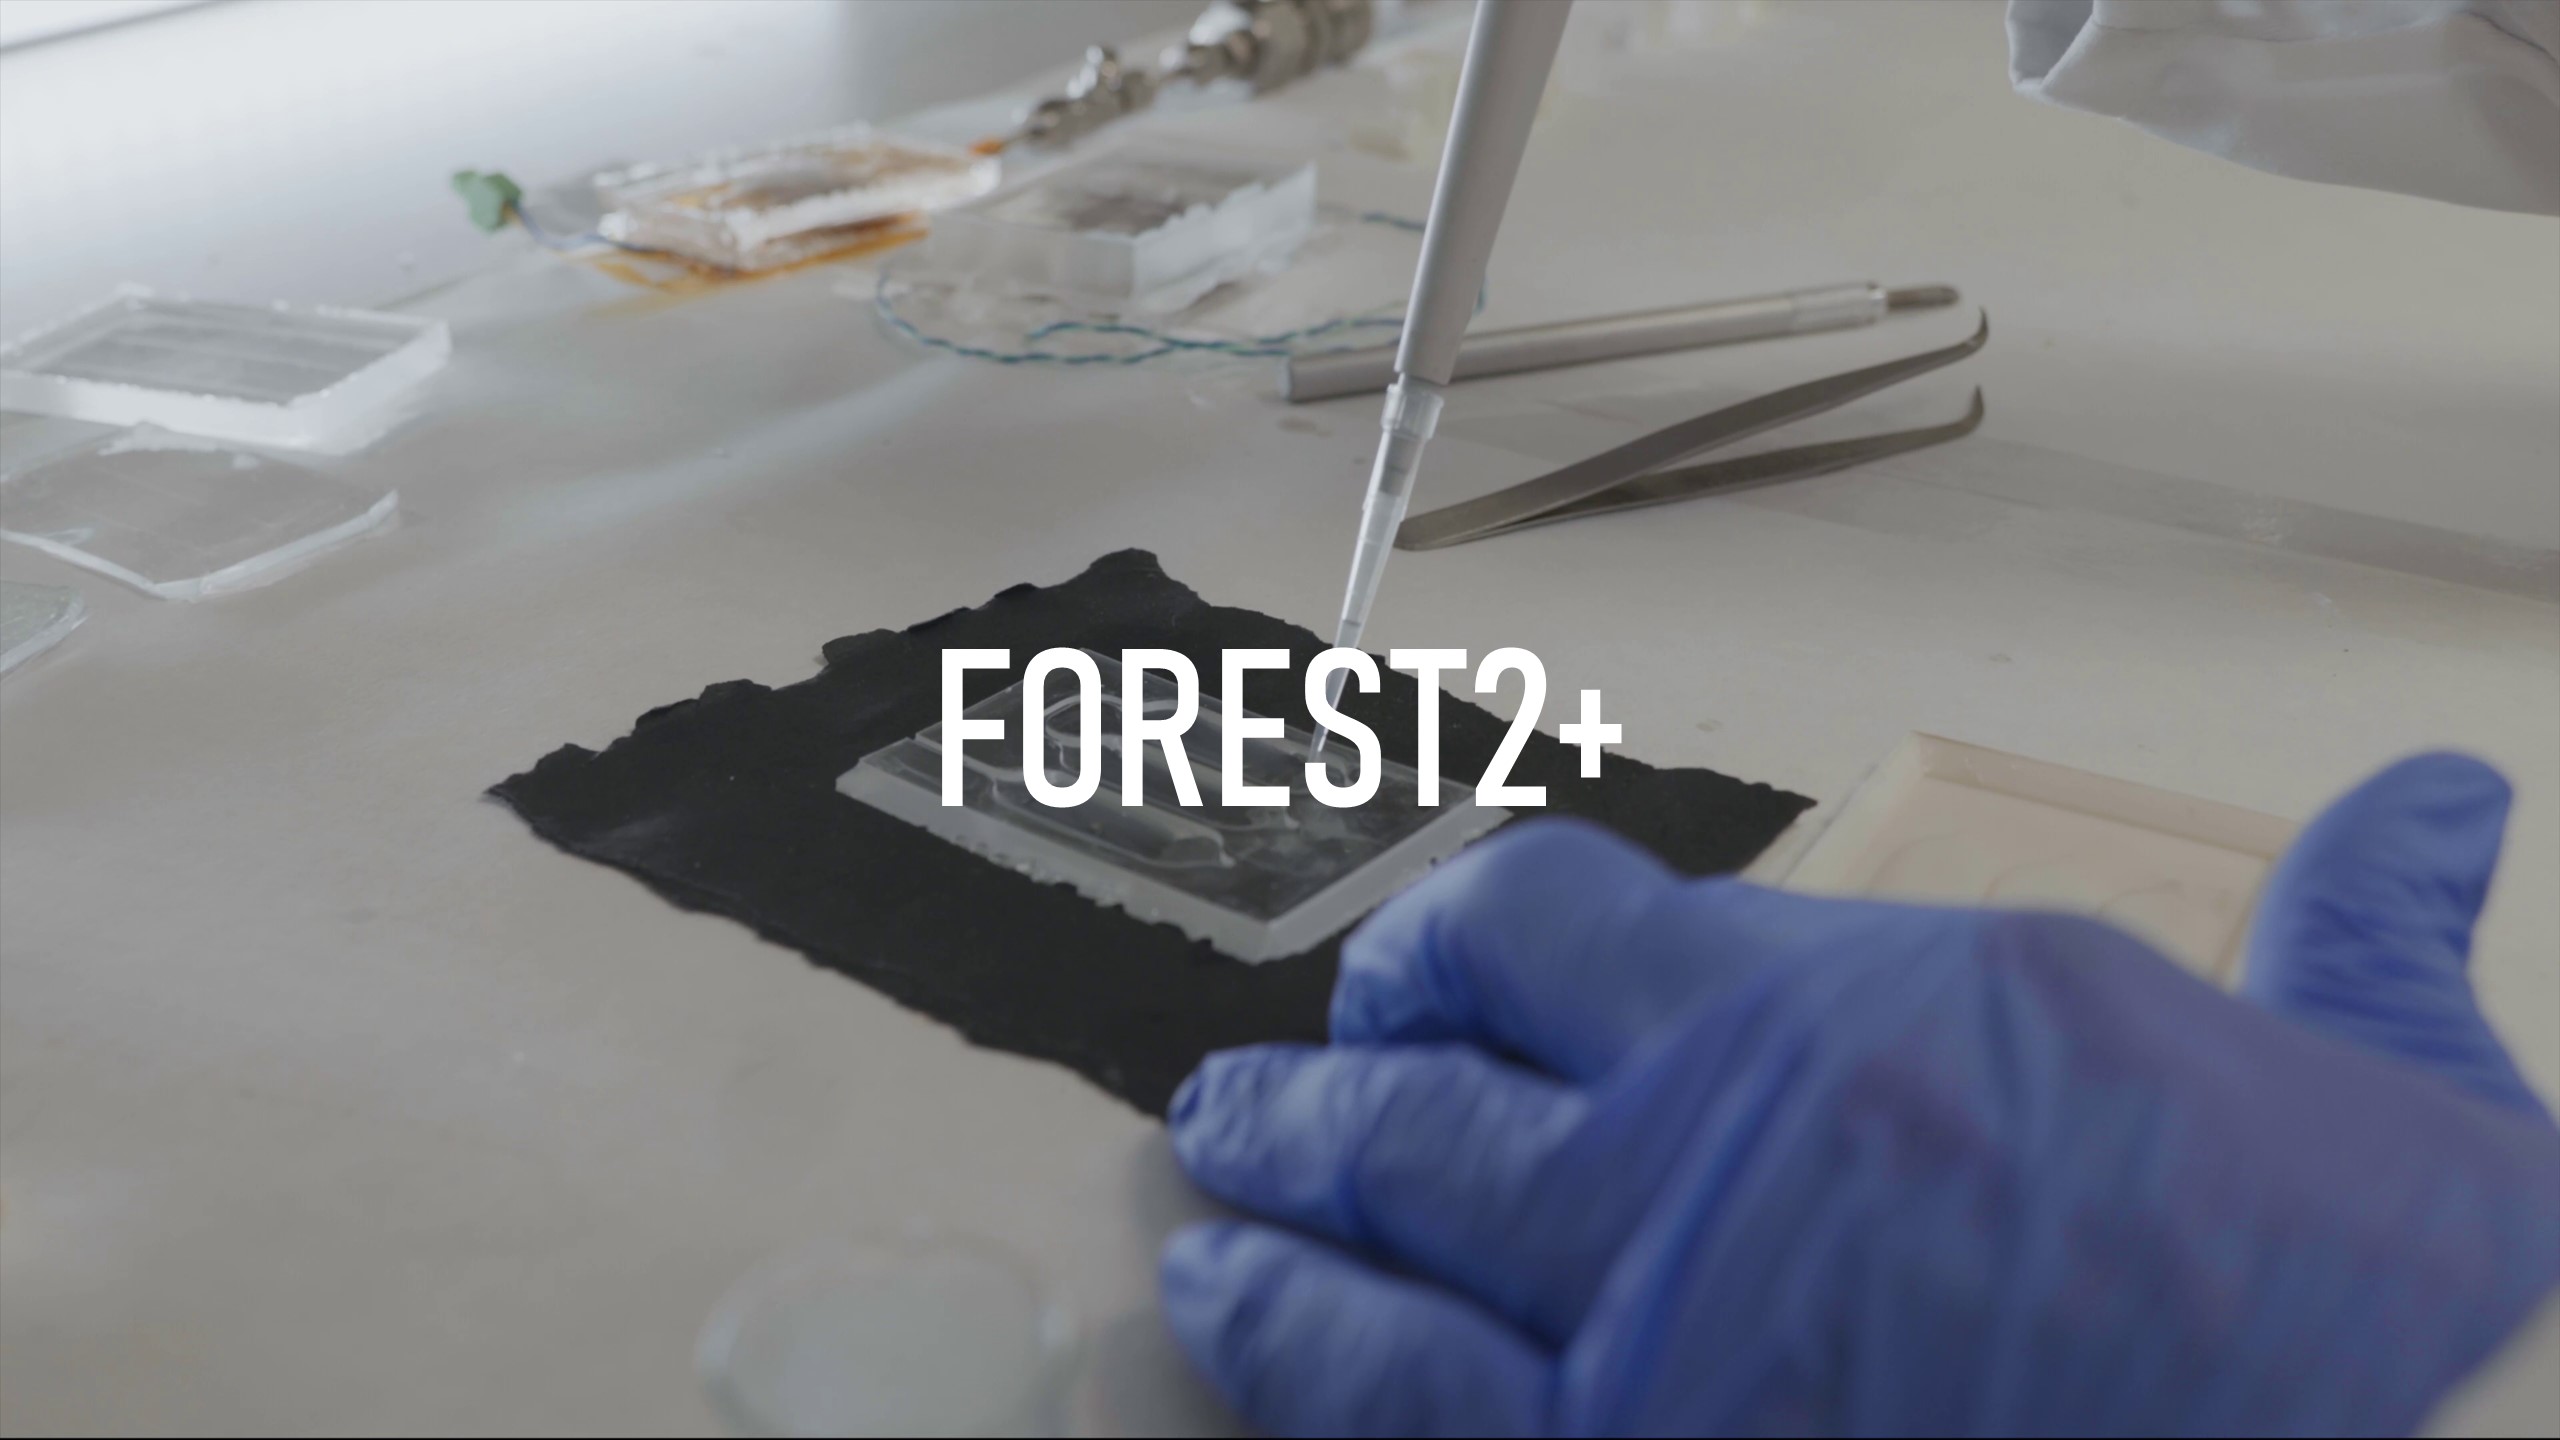 FOREST2+